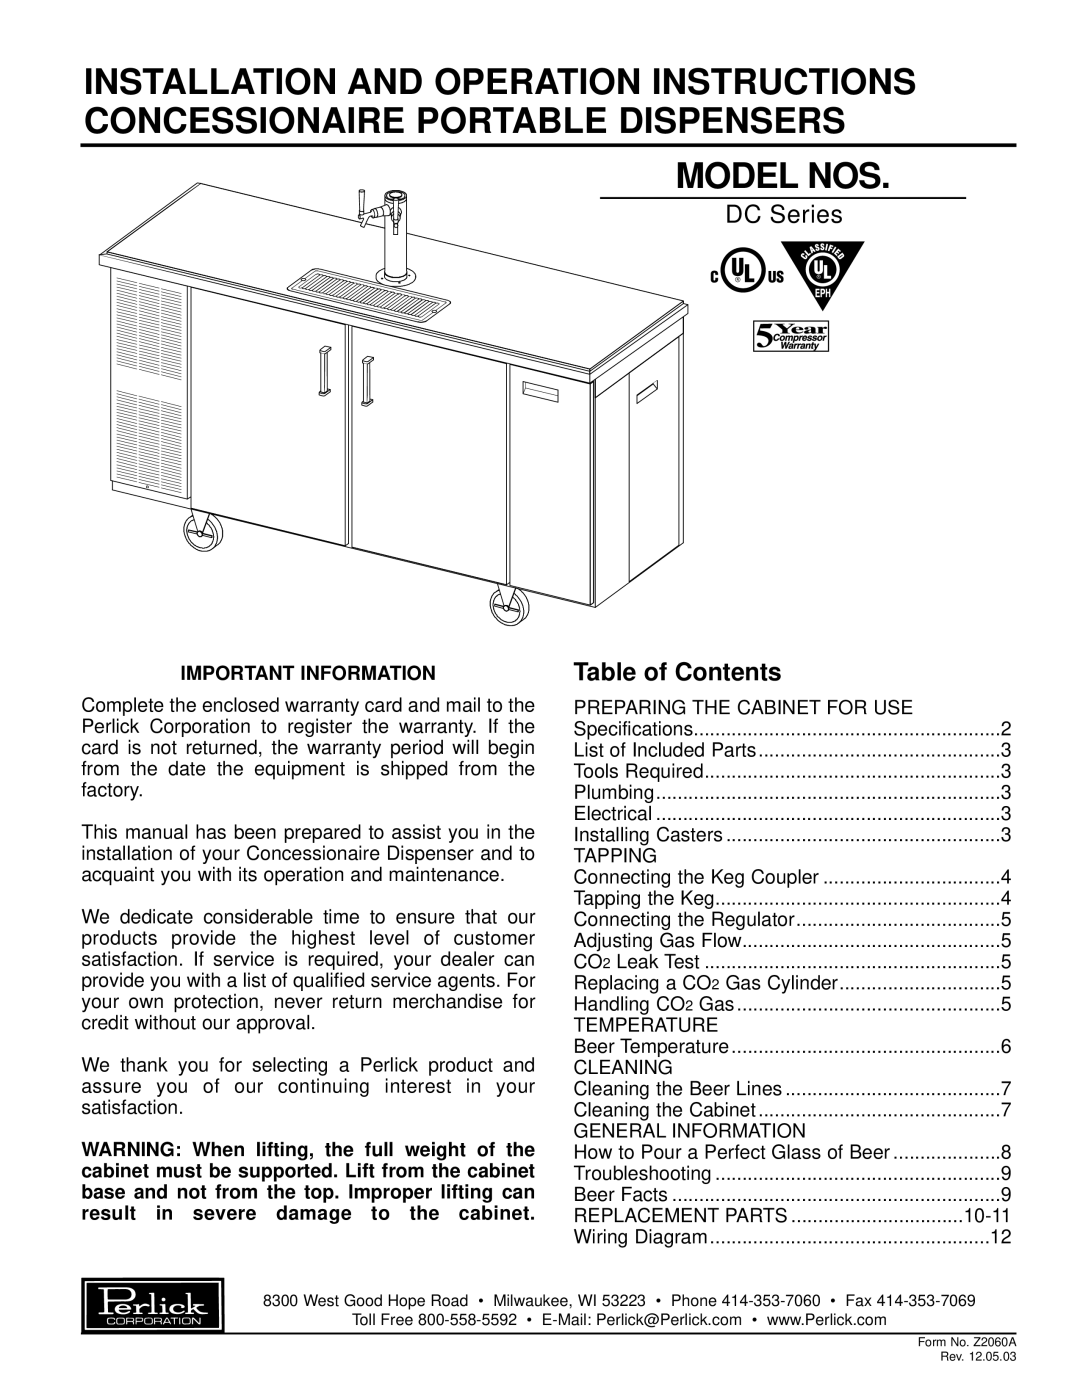 Perlick DC Series specifications Important Information, Model Nos, Table of Contents 